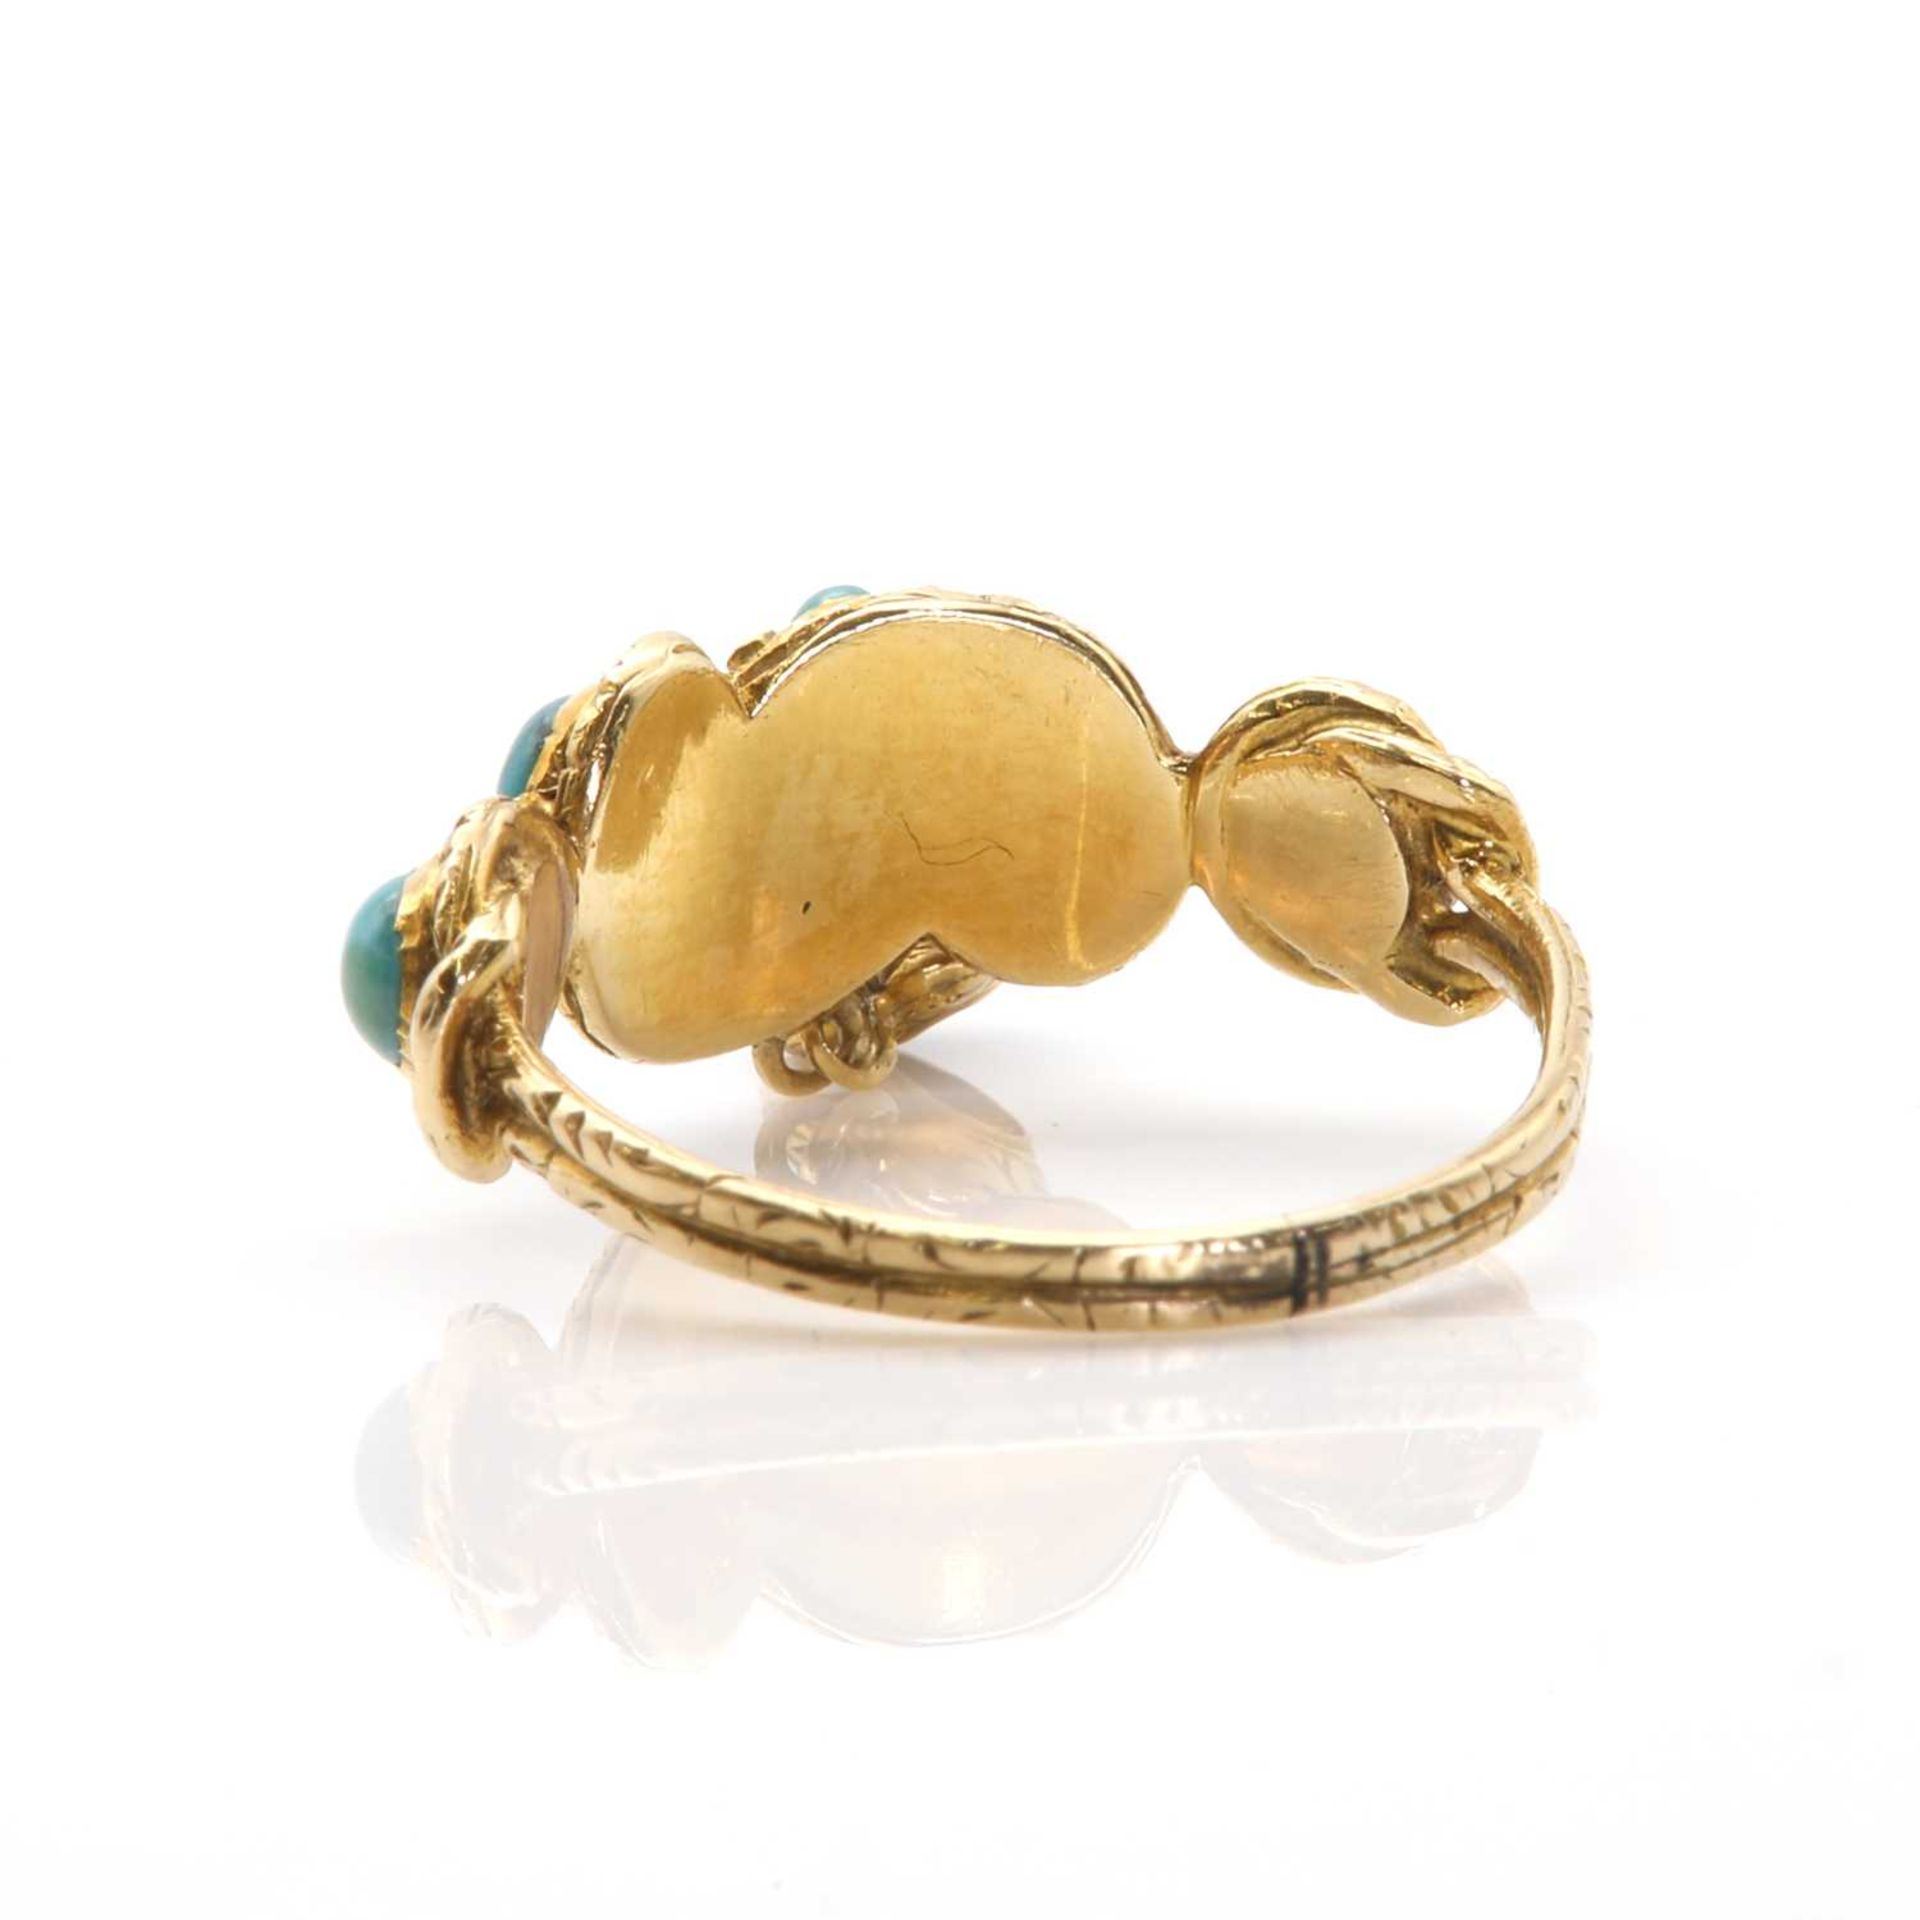 A Victorian gold and turquoise serpent knot ring, - Image 3 of 3